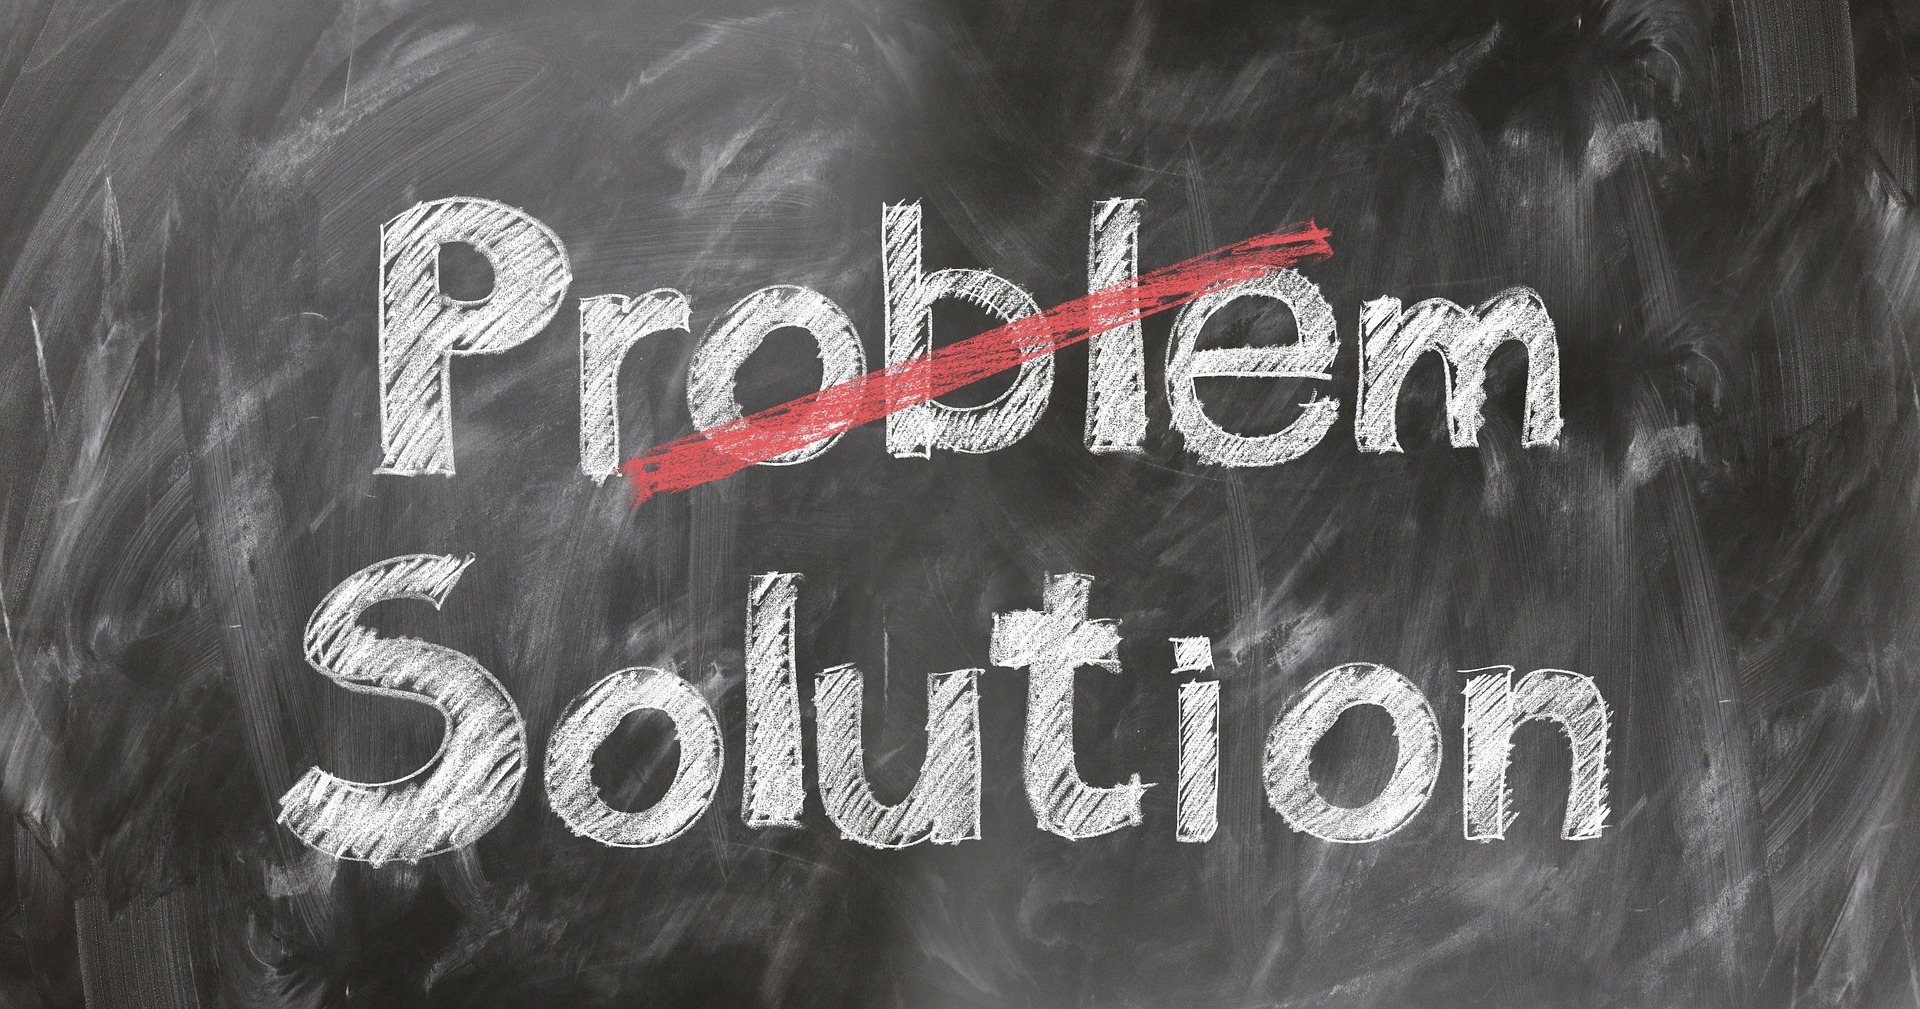 Focus on the Solution Not the Problem